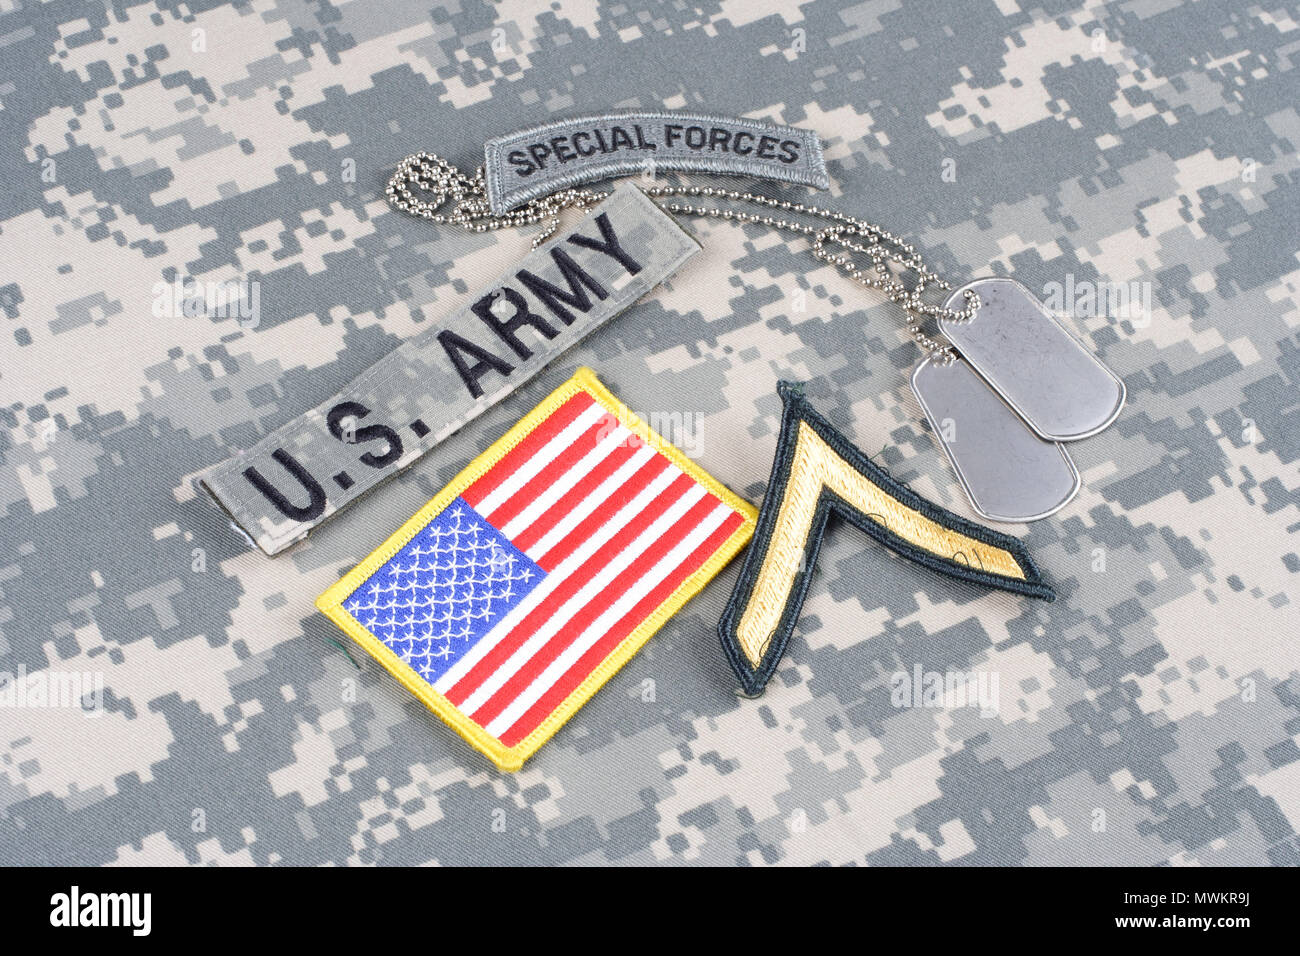 KIEV, UKRAINE - August 21, 2015. US ARMY special forces insignia on camouflage uniform Stock Photo